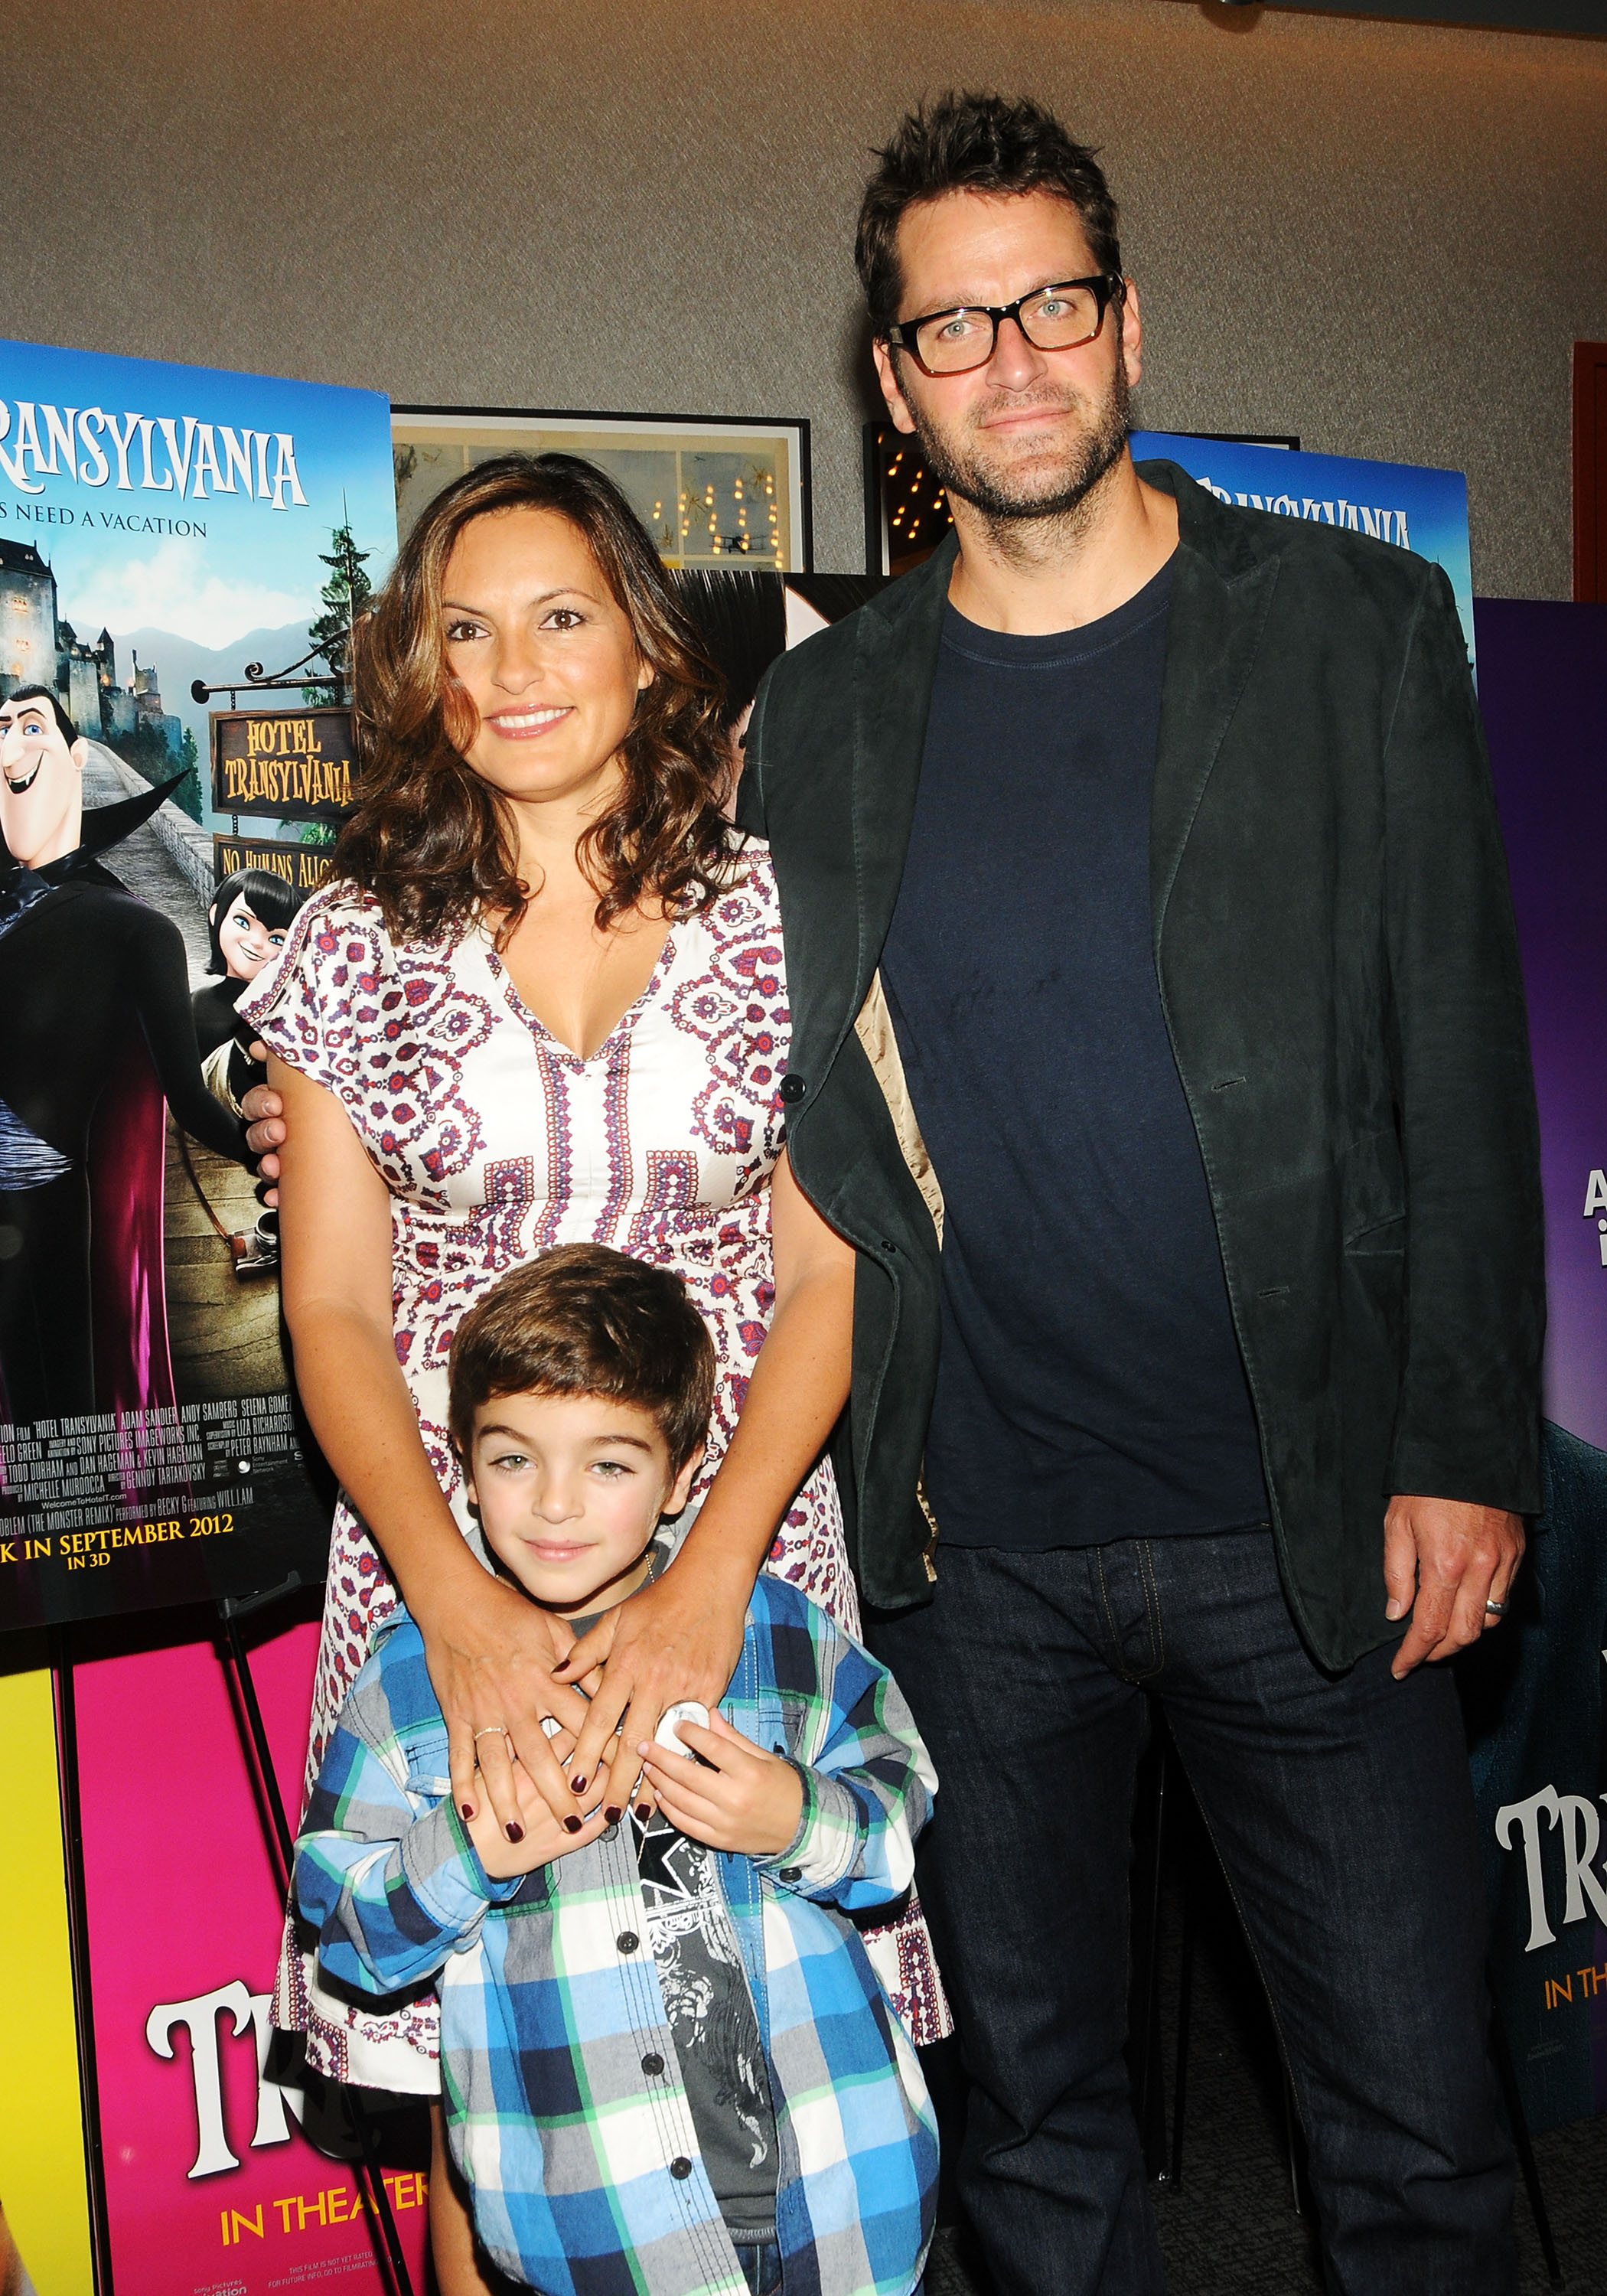 Mariska Hargitay, August, and Peter Hermann at the "Hotel Transylvania" premiere in New York City, 2012 | Source: Getty Images